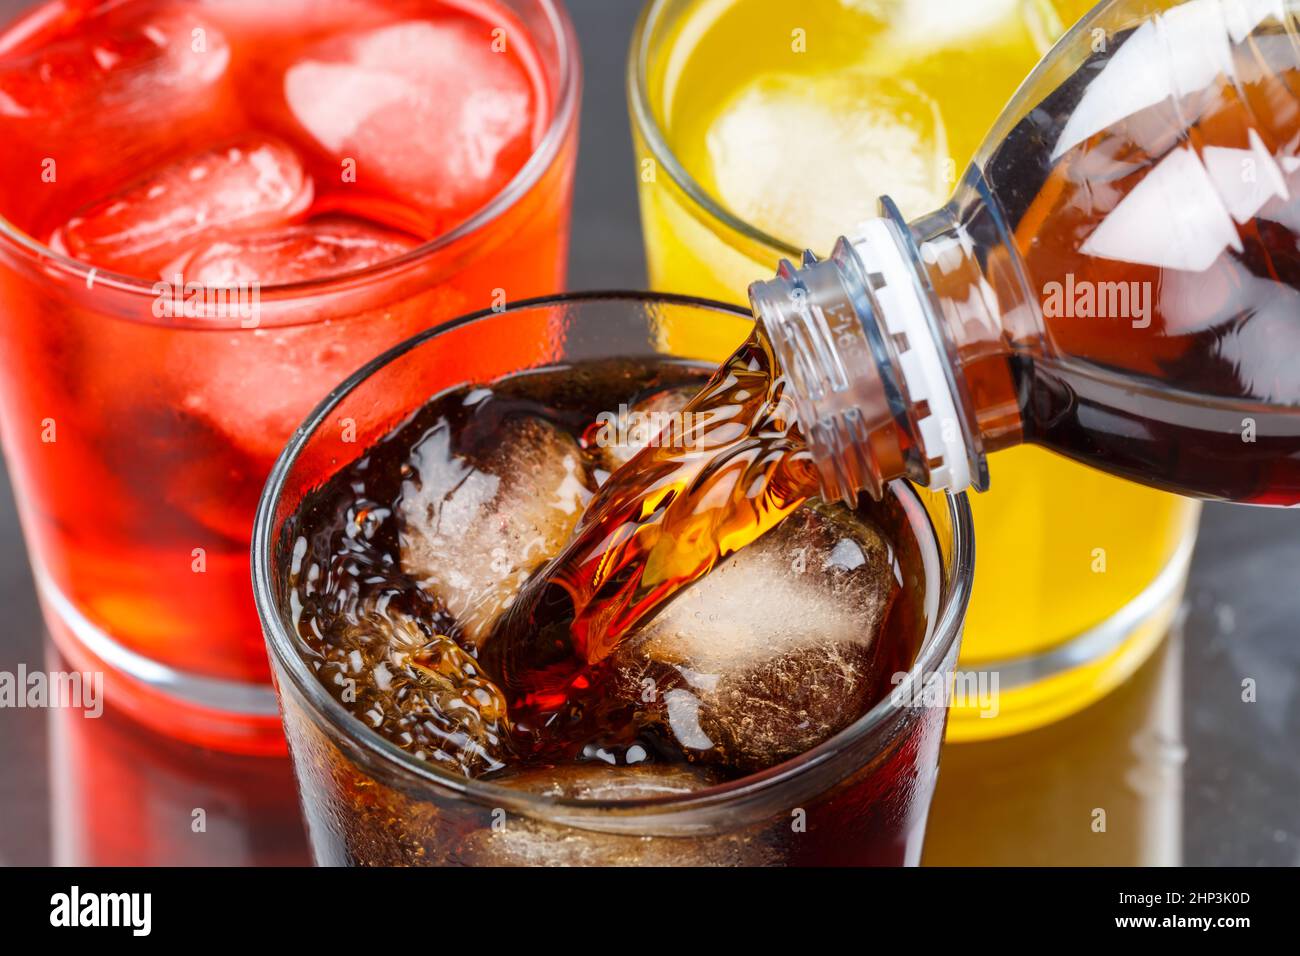 Pouring cola drink drinks lemonade softdrinks in a glass pour Stock Photo